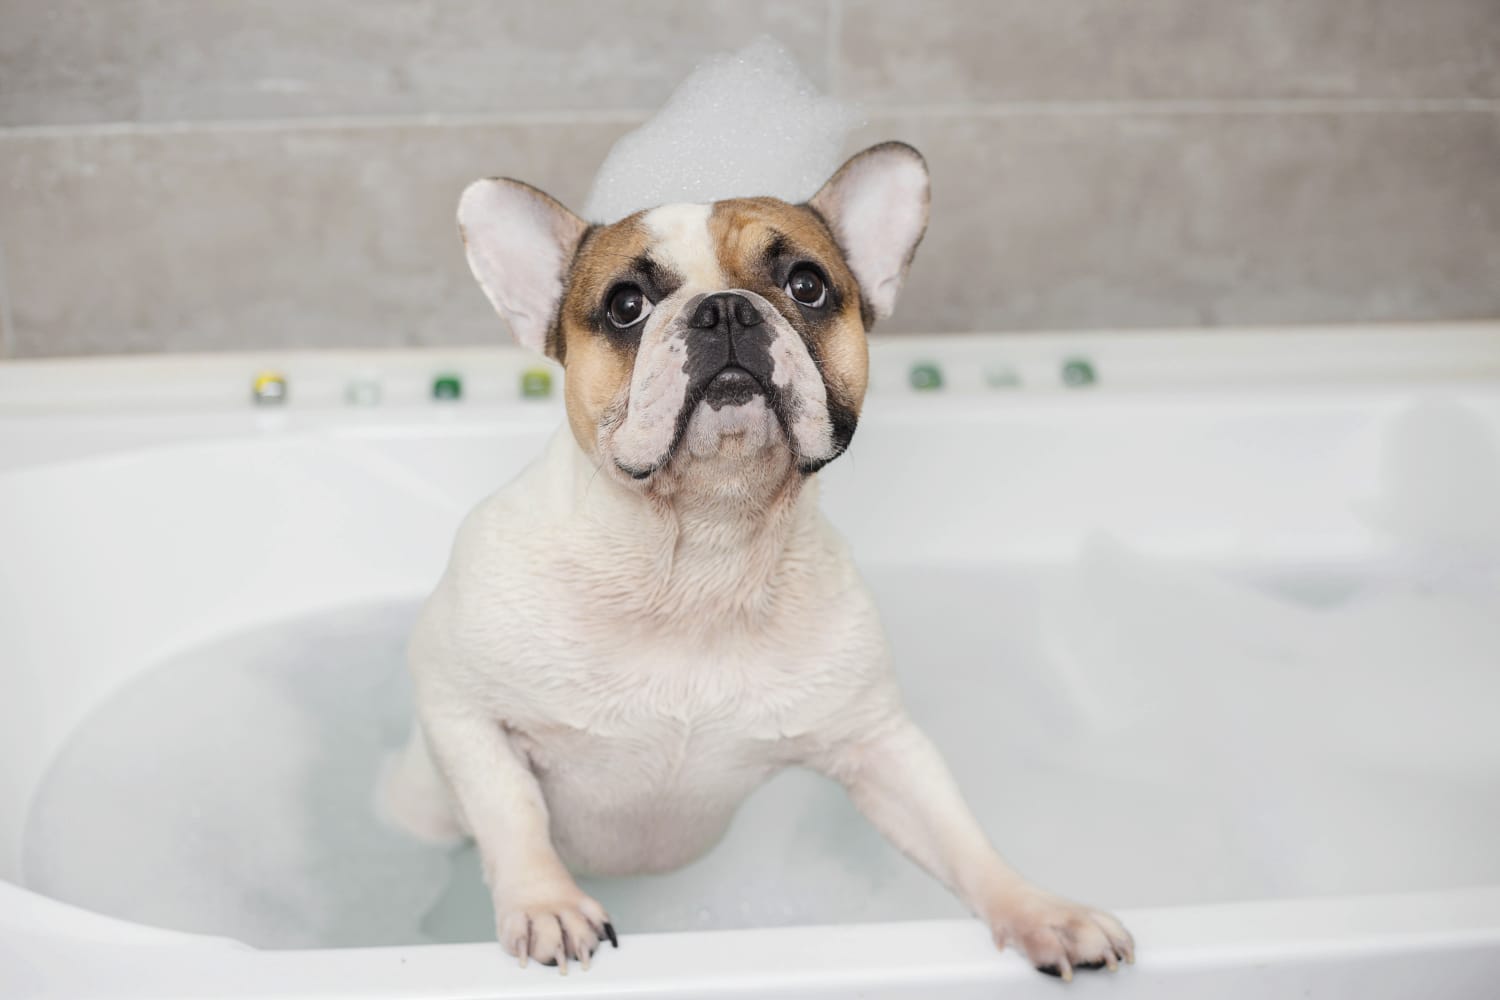 Bissell’s Newest Vacuum Gives Your Dog a Mess-Free Bath | Apartment Therapy